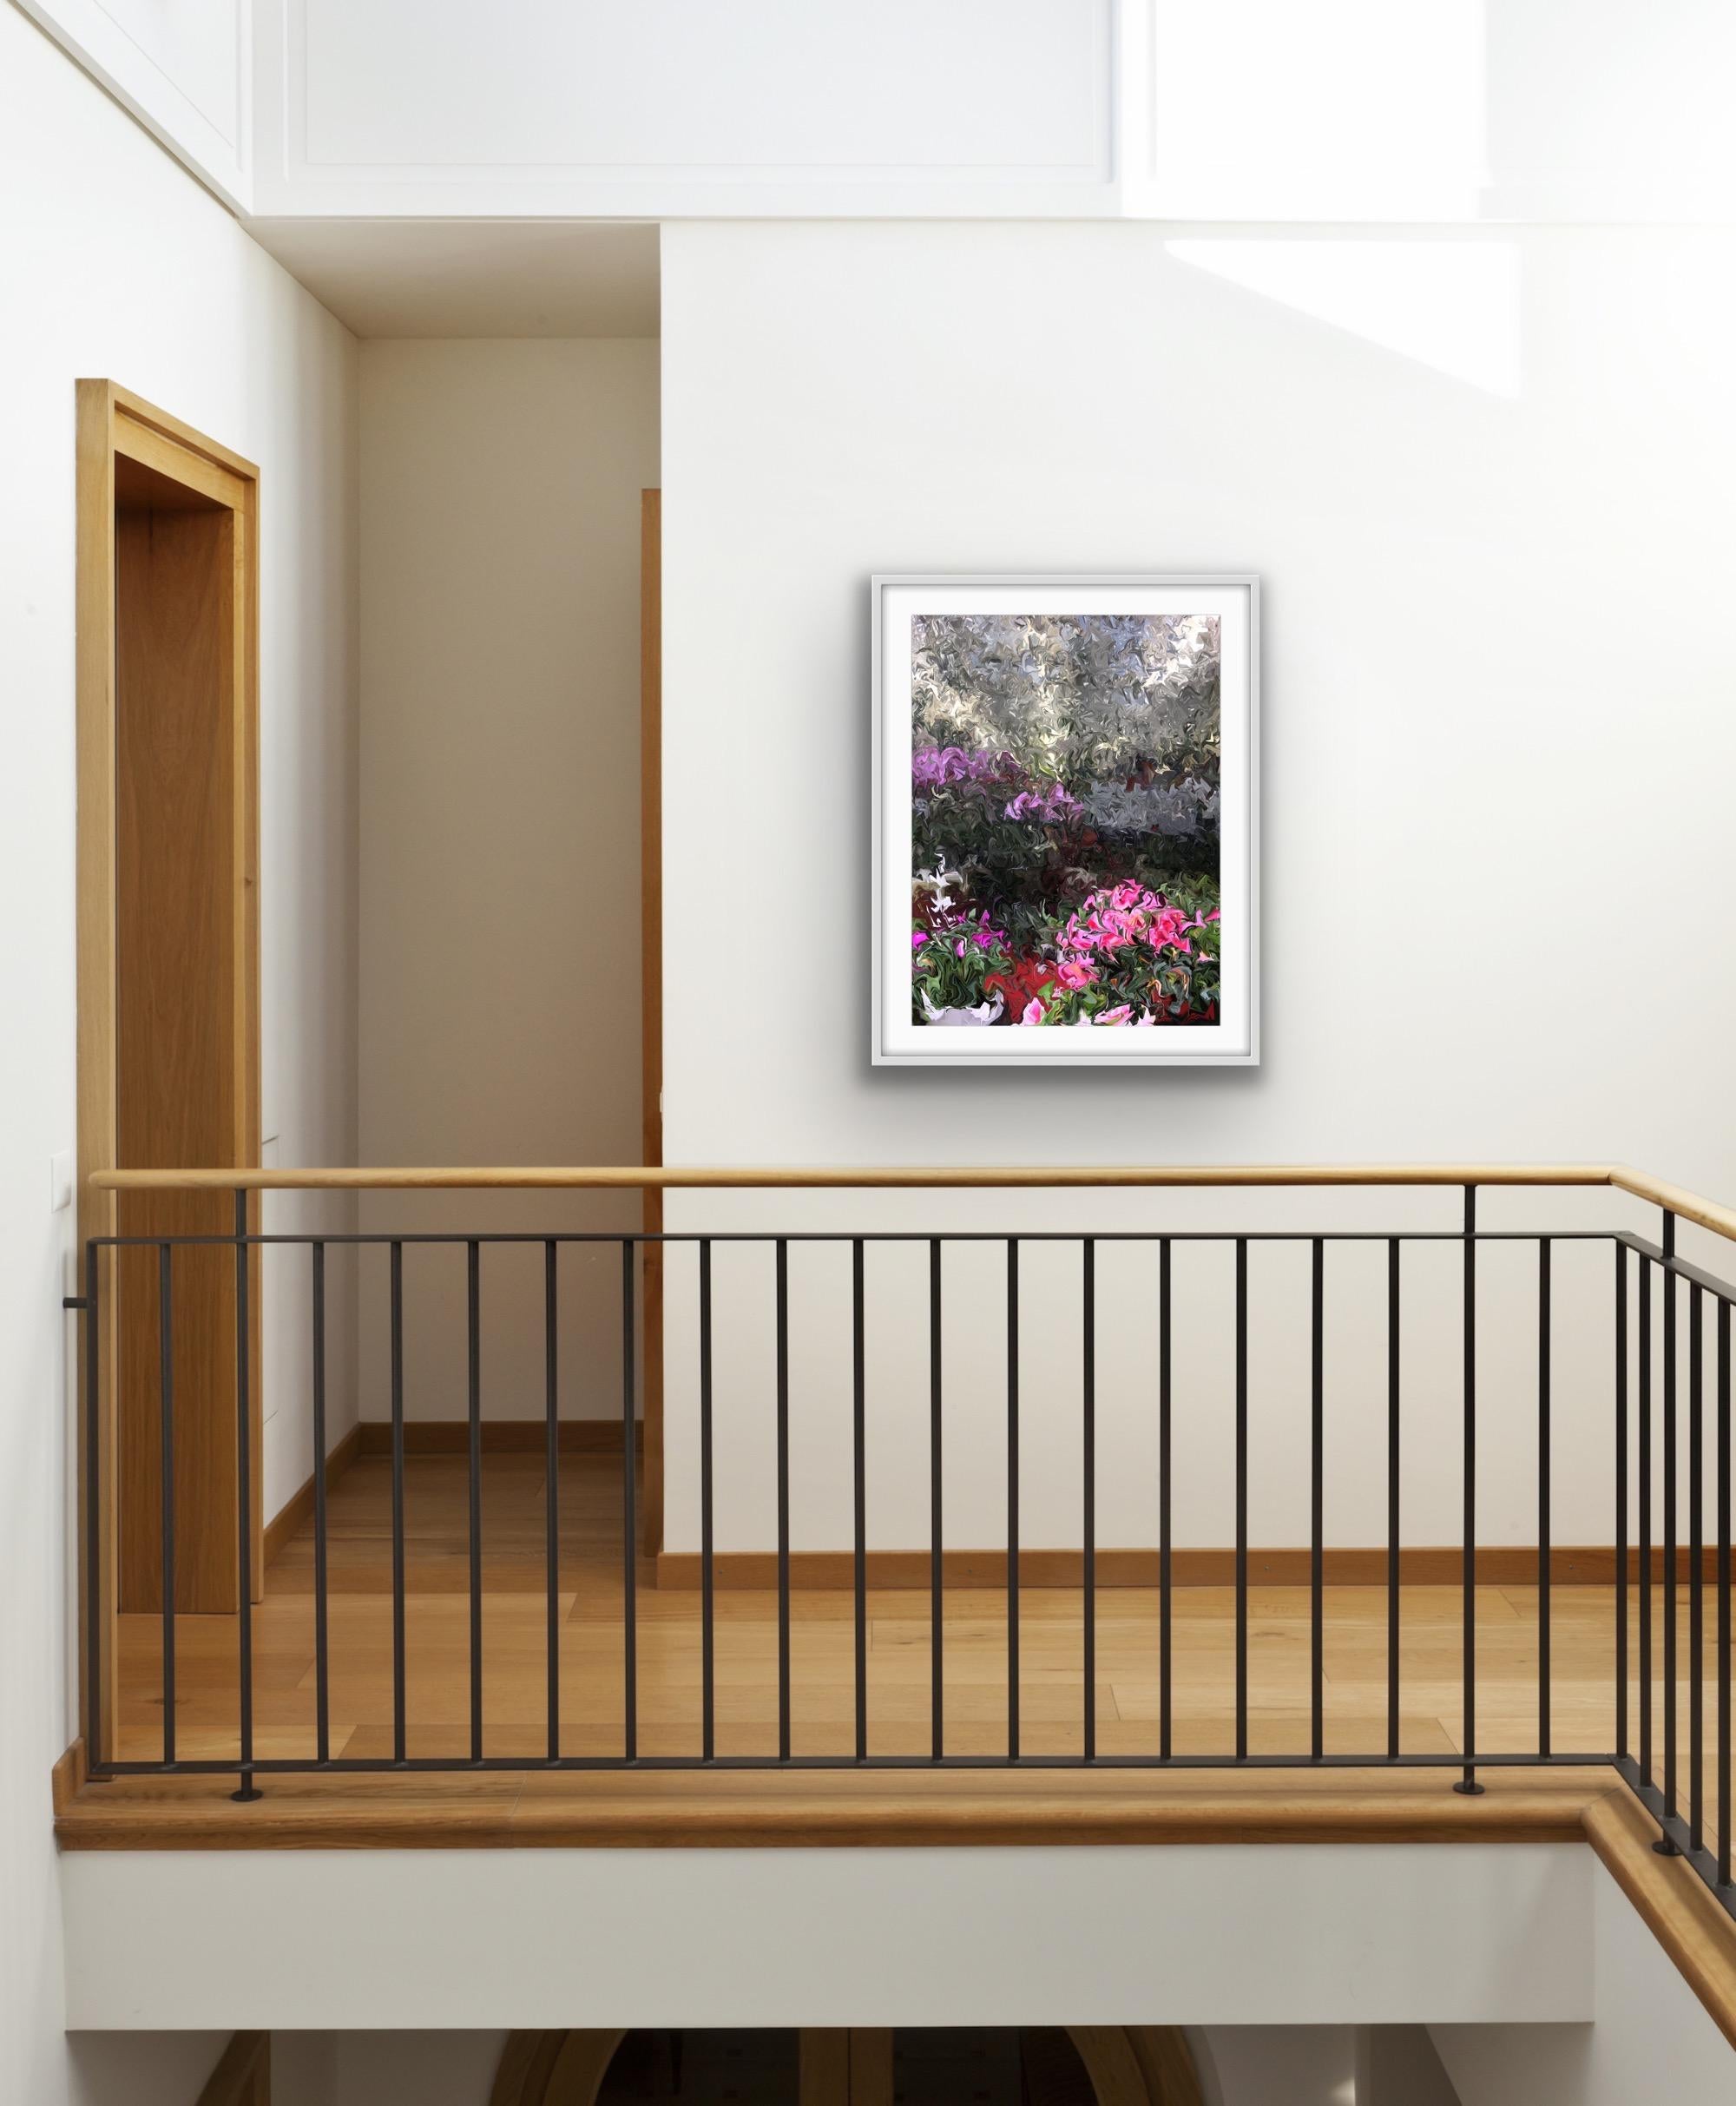 Azaleas and Orchids, 2018 is part of the artist's 